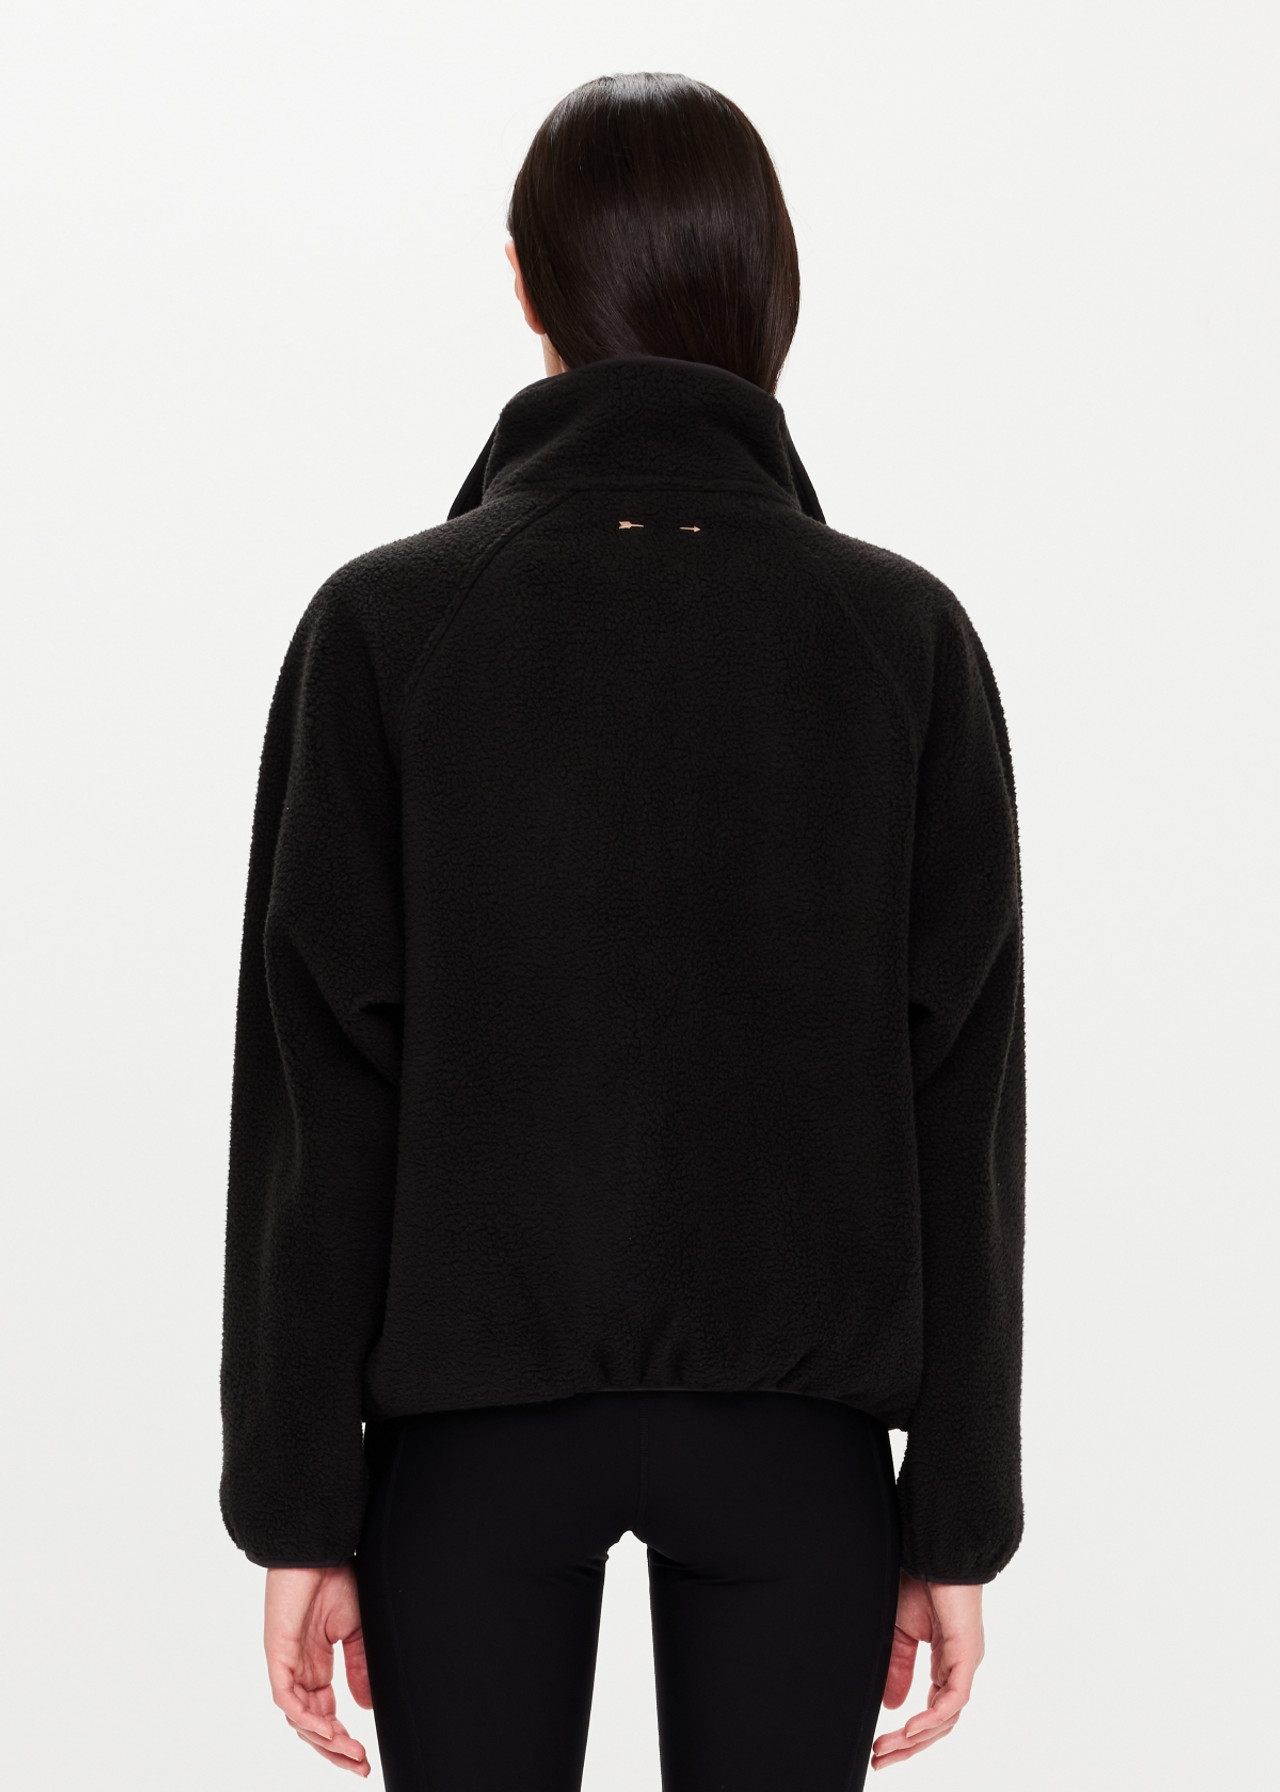 HARLOW PULLOVER in BLACK | The UPSIDE